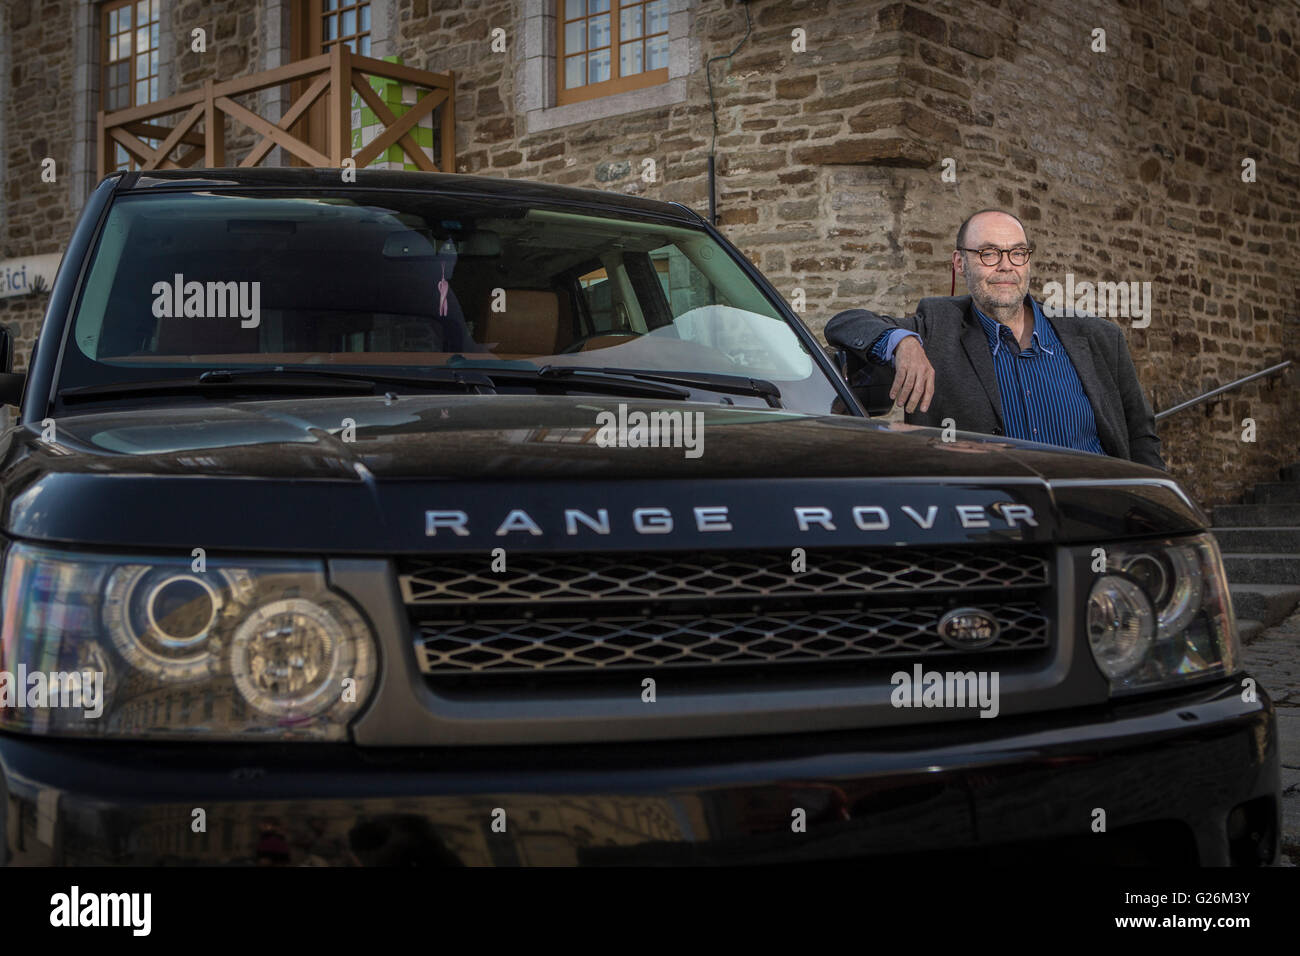 Jean Brouillard, CEO of communication Jean Brouillard, is pictured with his Range Rover in Quebec city on May 4, 2015 Stock Photo